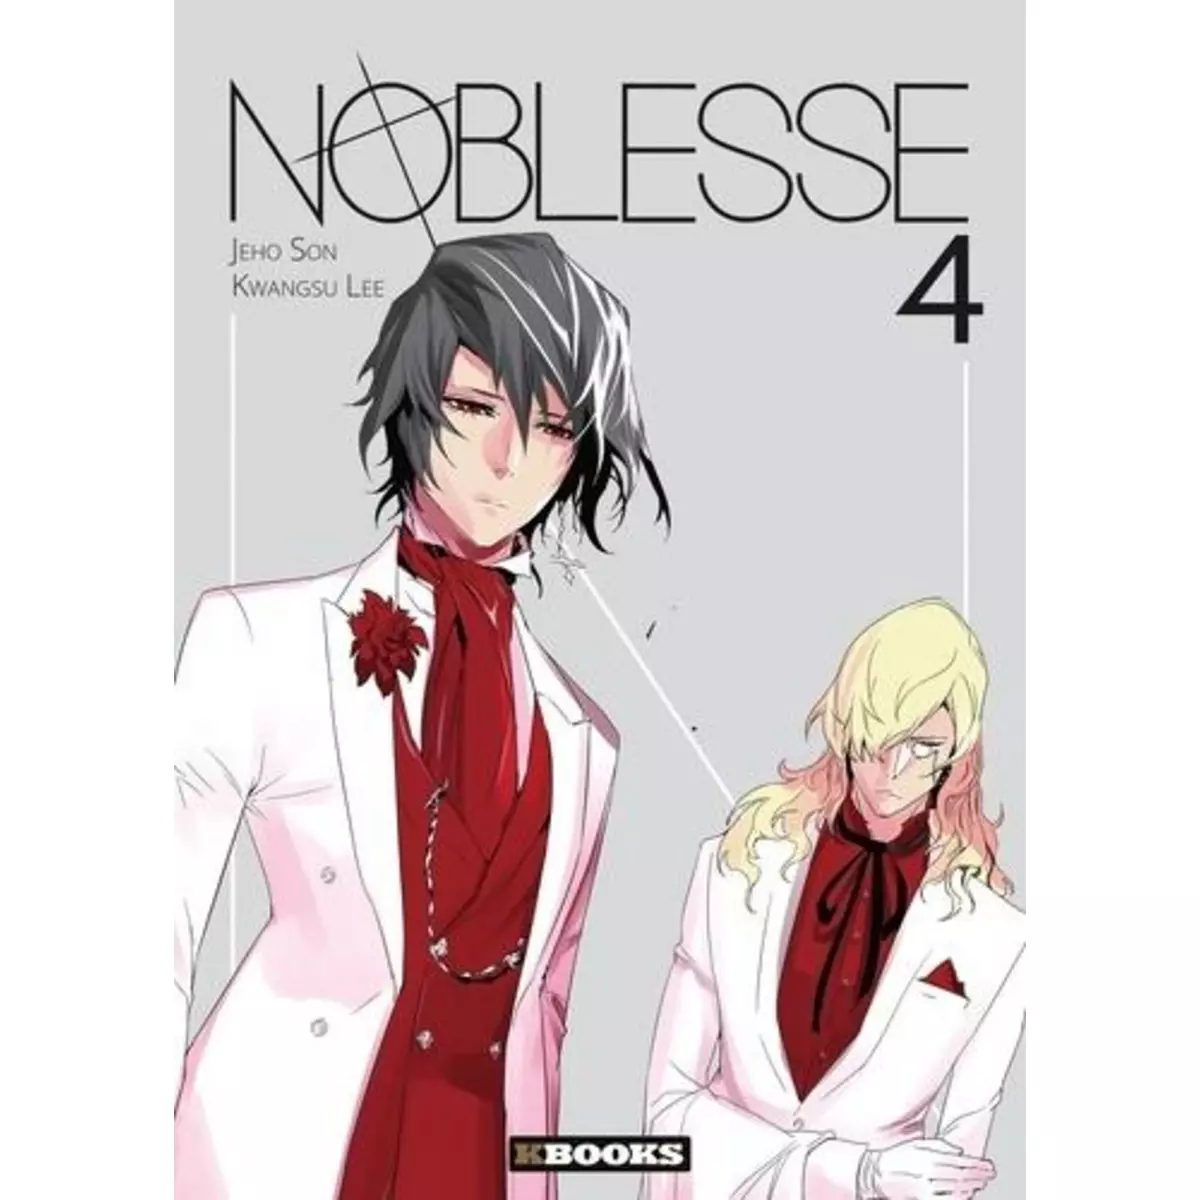  NOBLESSE TOME 4 , Son Jeho